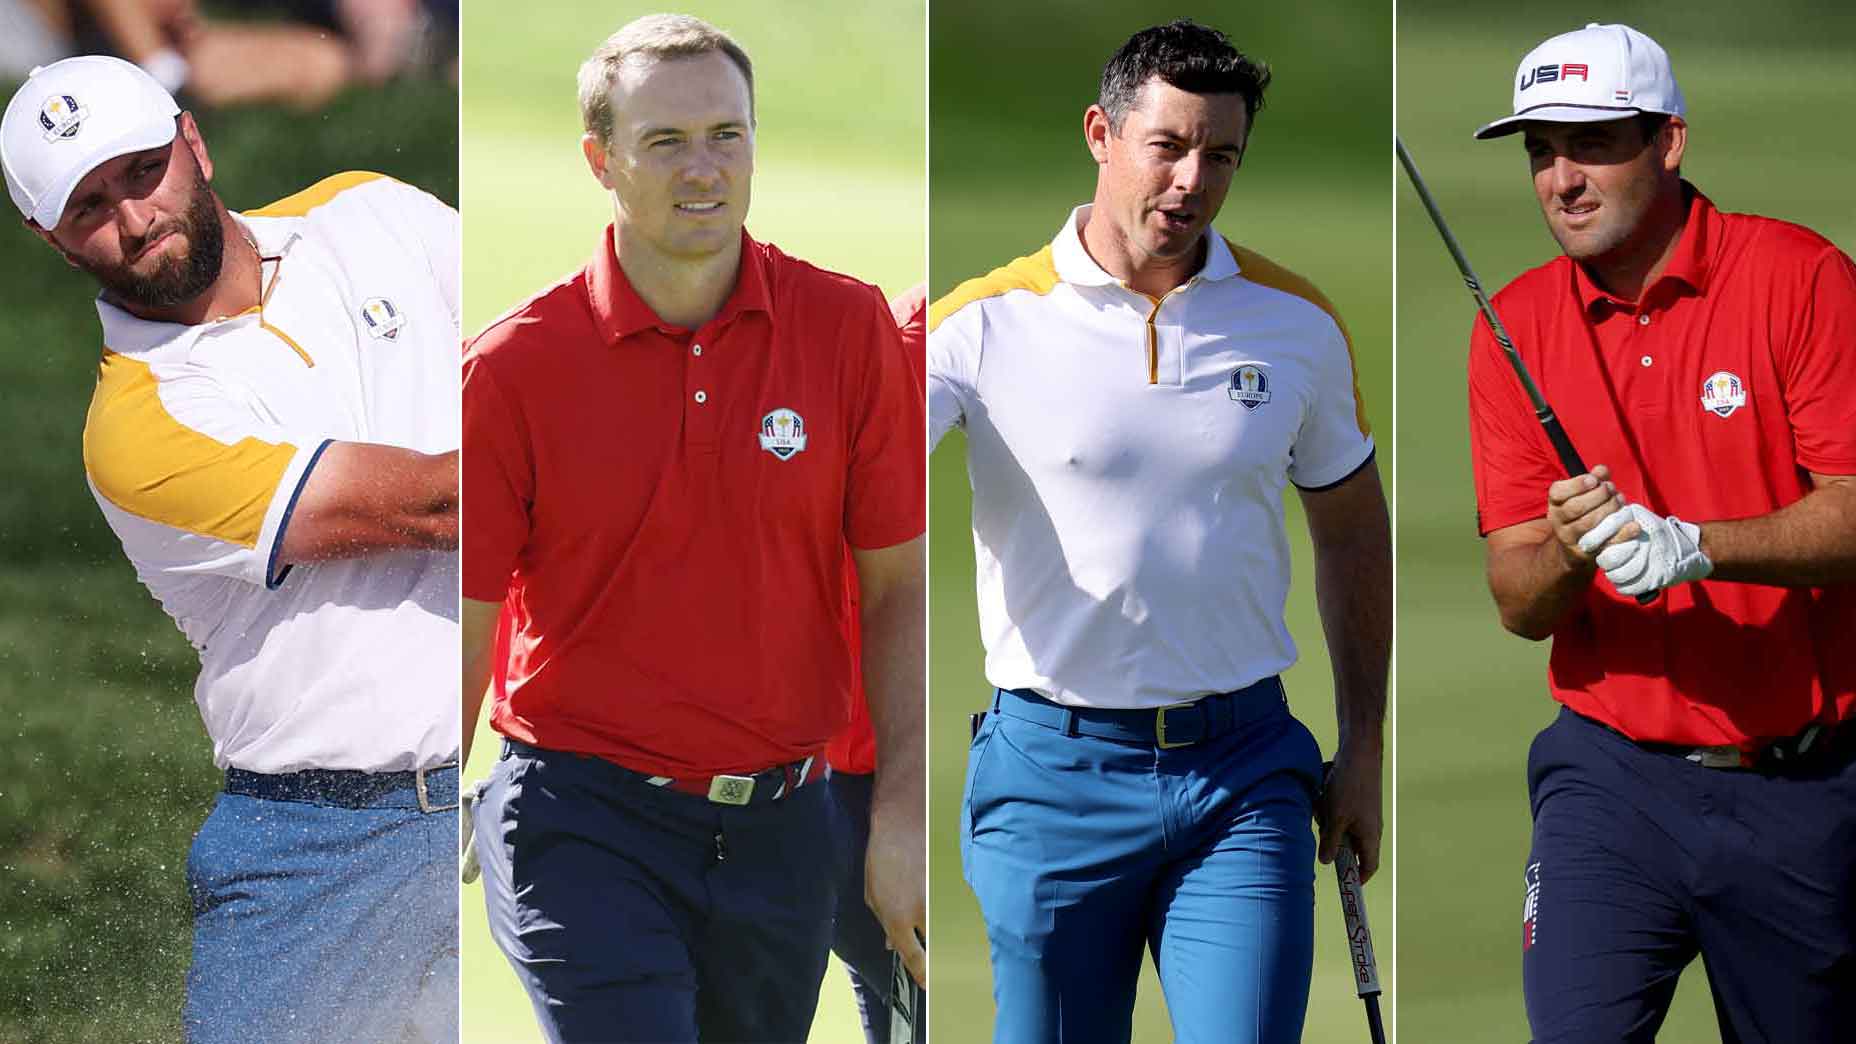 Ryder Cup power rankings